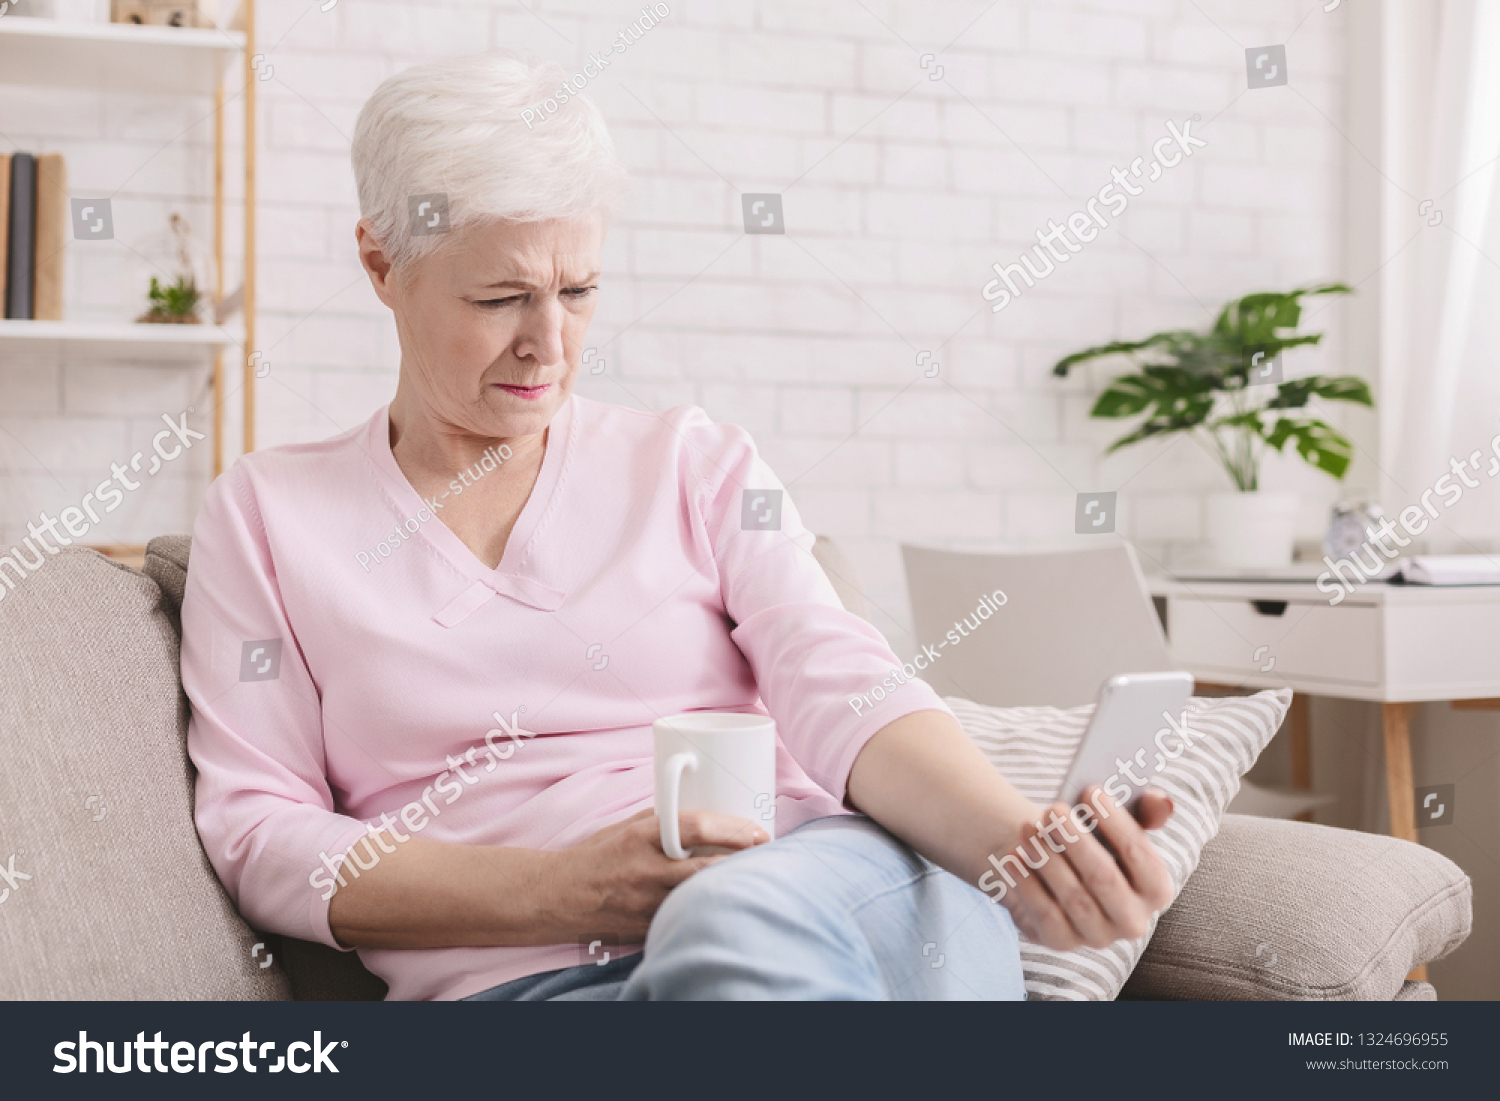 Hyperopia. Woman squinting and holding phone far from eyes, reading smartphone screen #1324696955